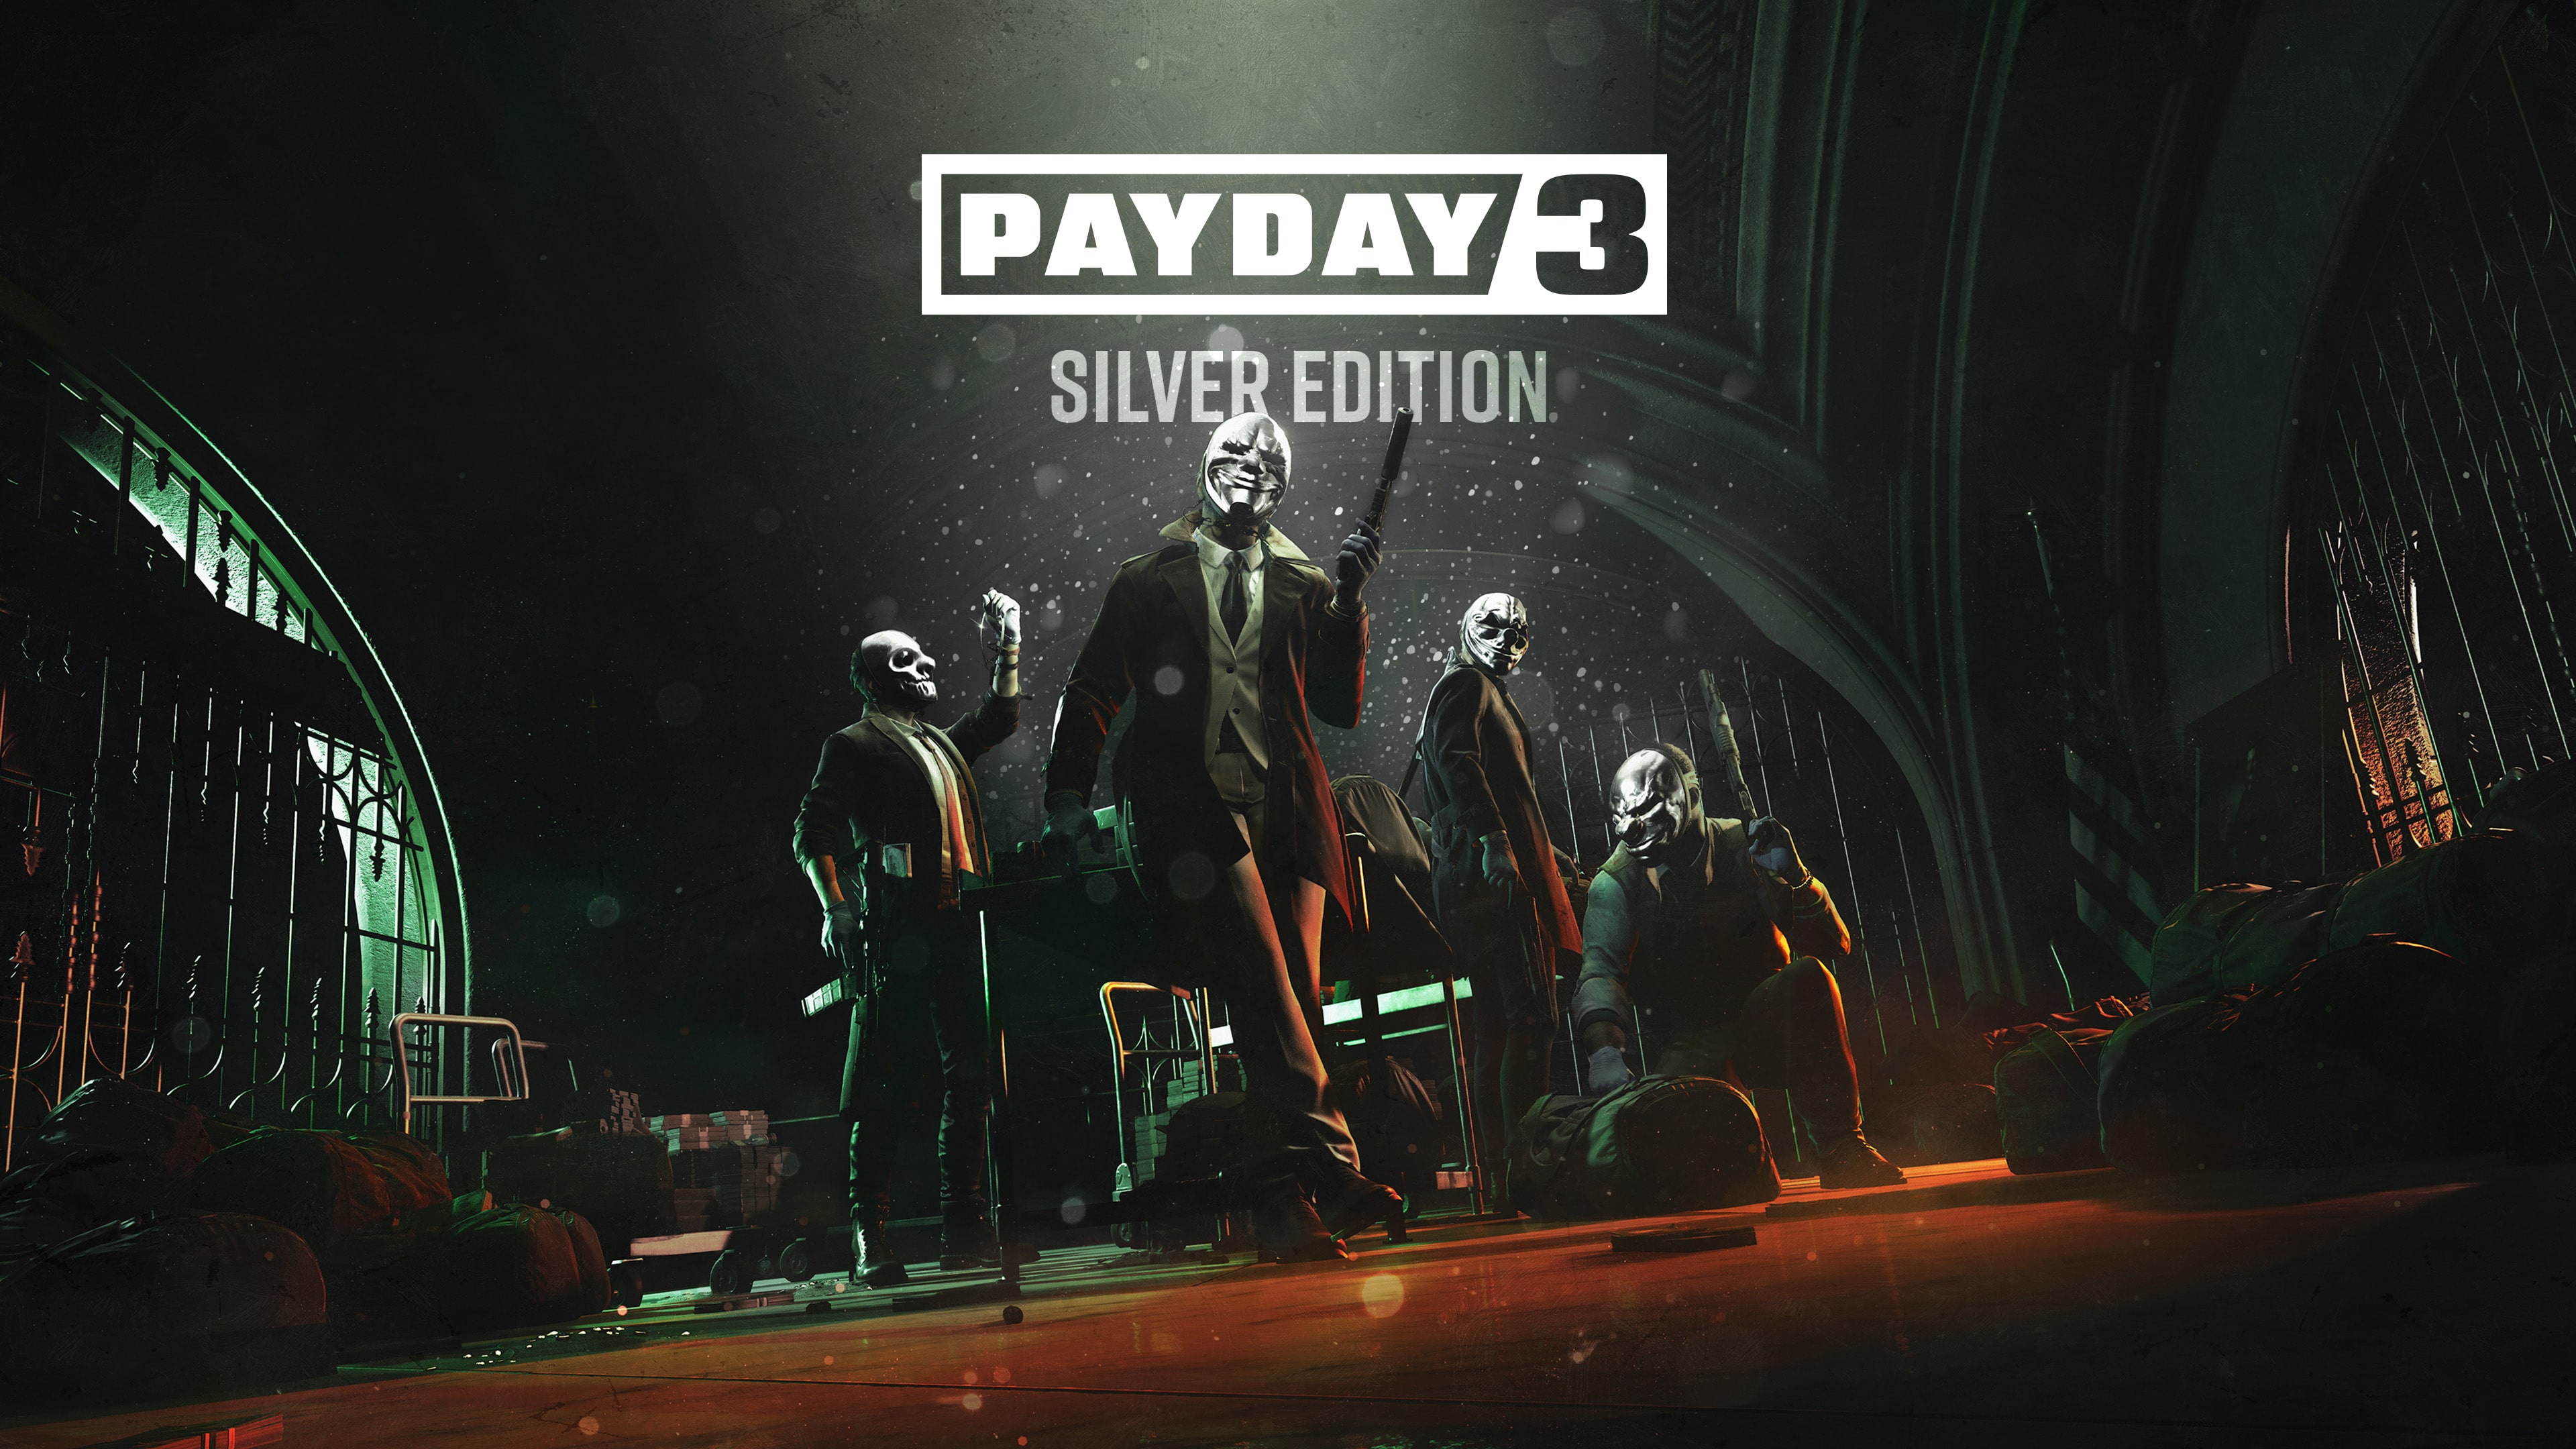 PAYDAY3 Silver Edition